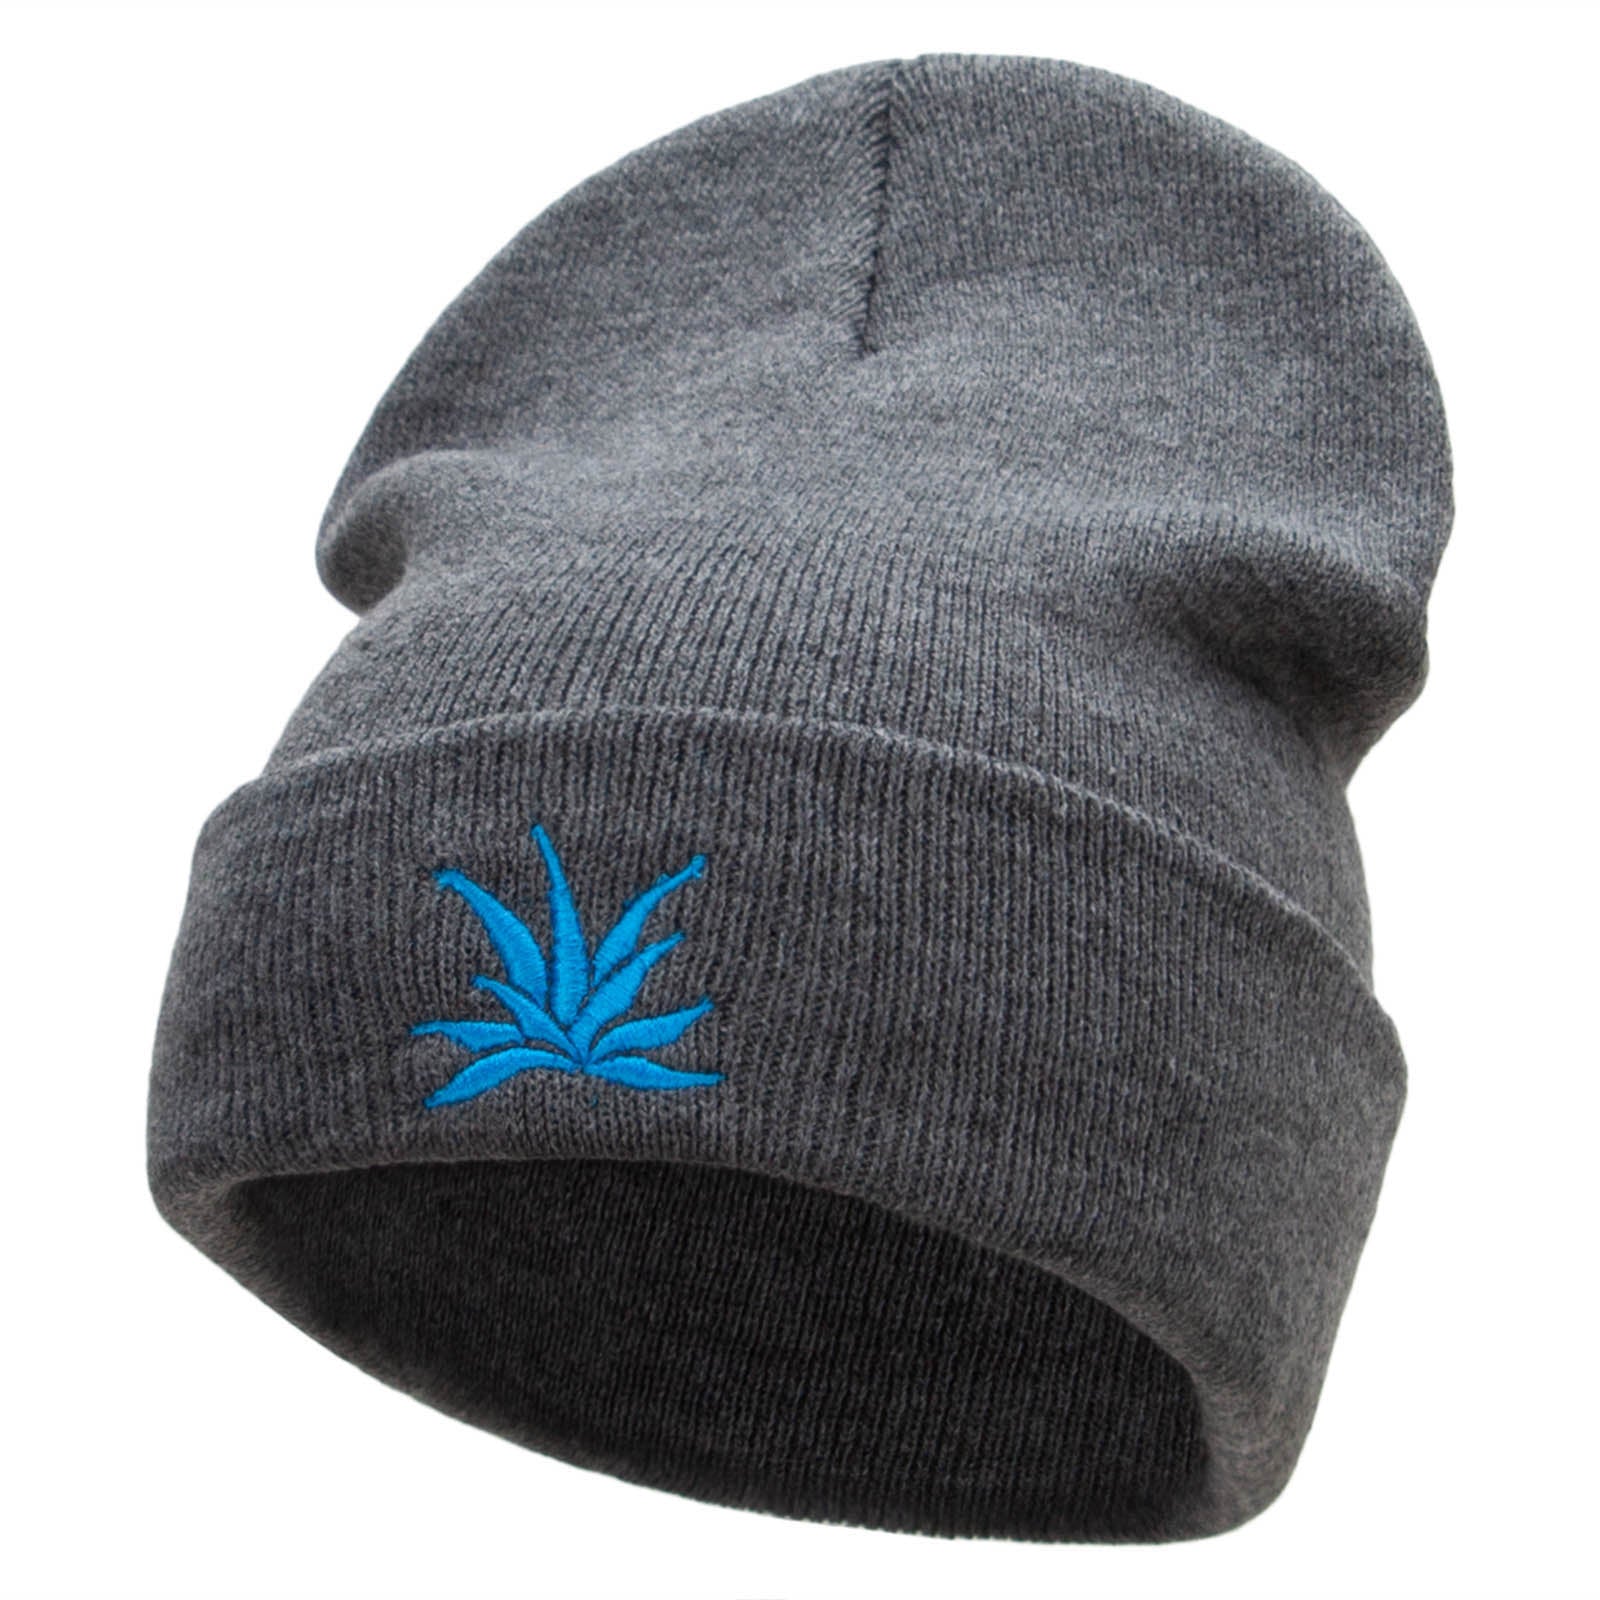 El Blue Agave Embroidered 12 Inch Long Knitted Beanie - Dk Grey OSFM